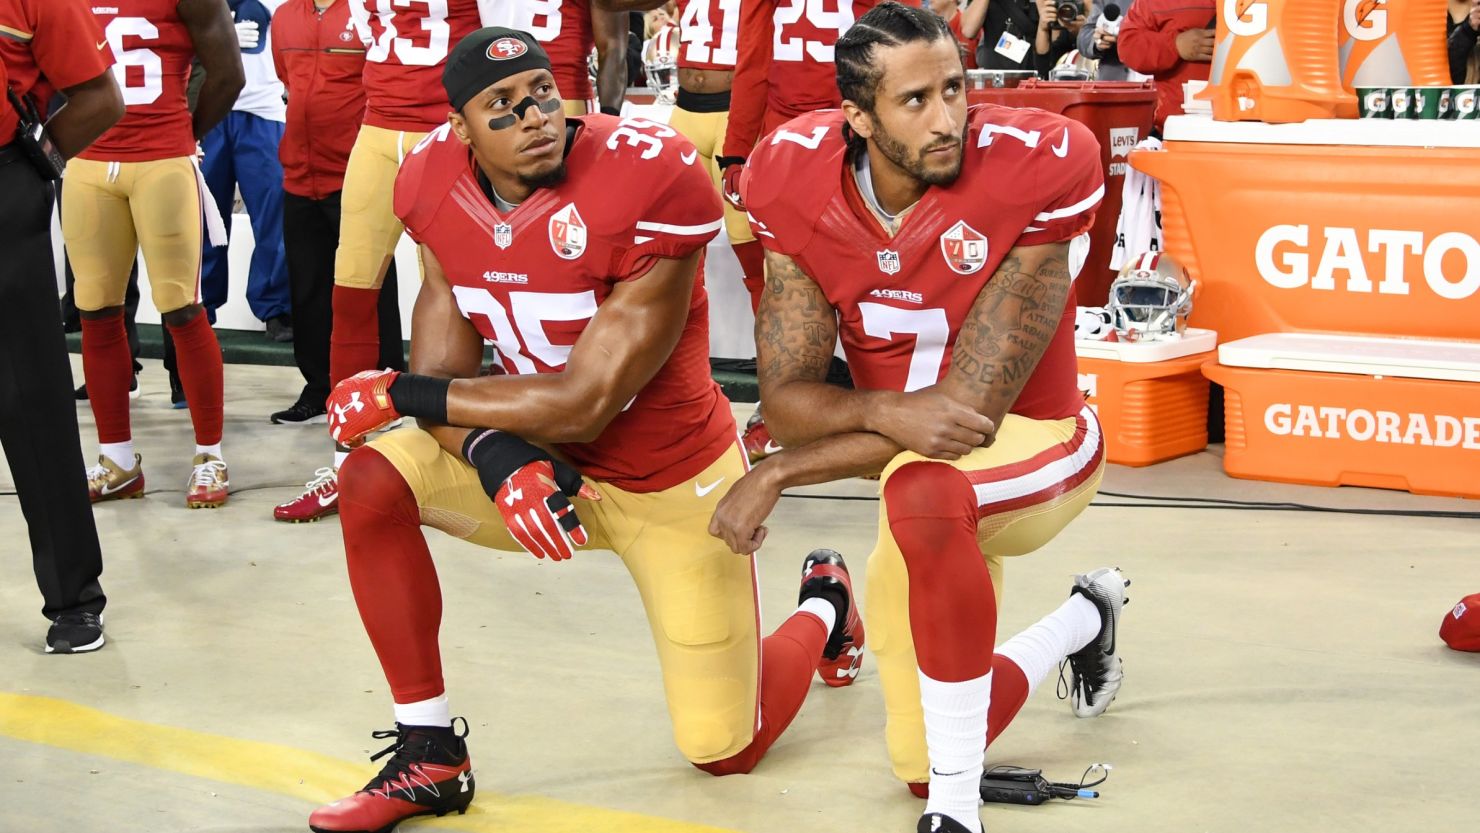 Colin Kaepernick, right, and Eric Reid of the San Francisco 49ers kneel in protest during the national anthem prior to a game against the Los Angeles Rams on September 12.